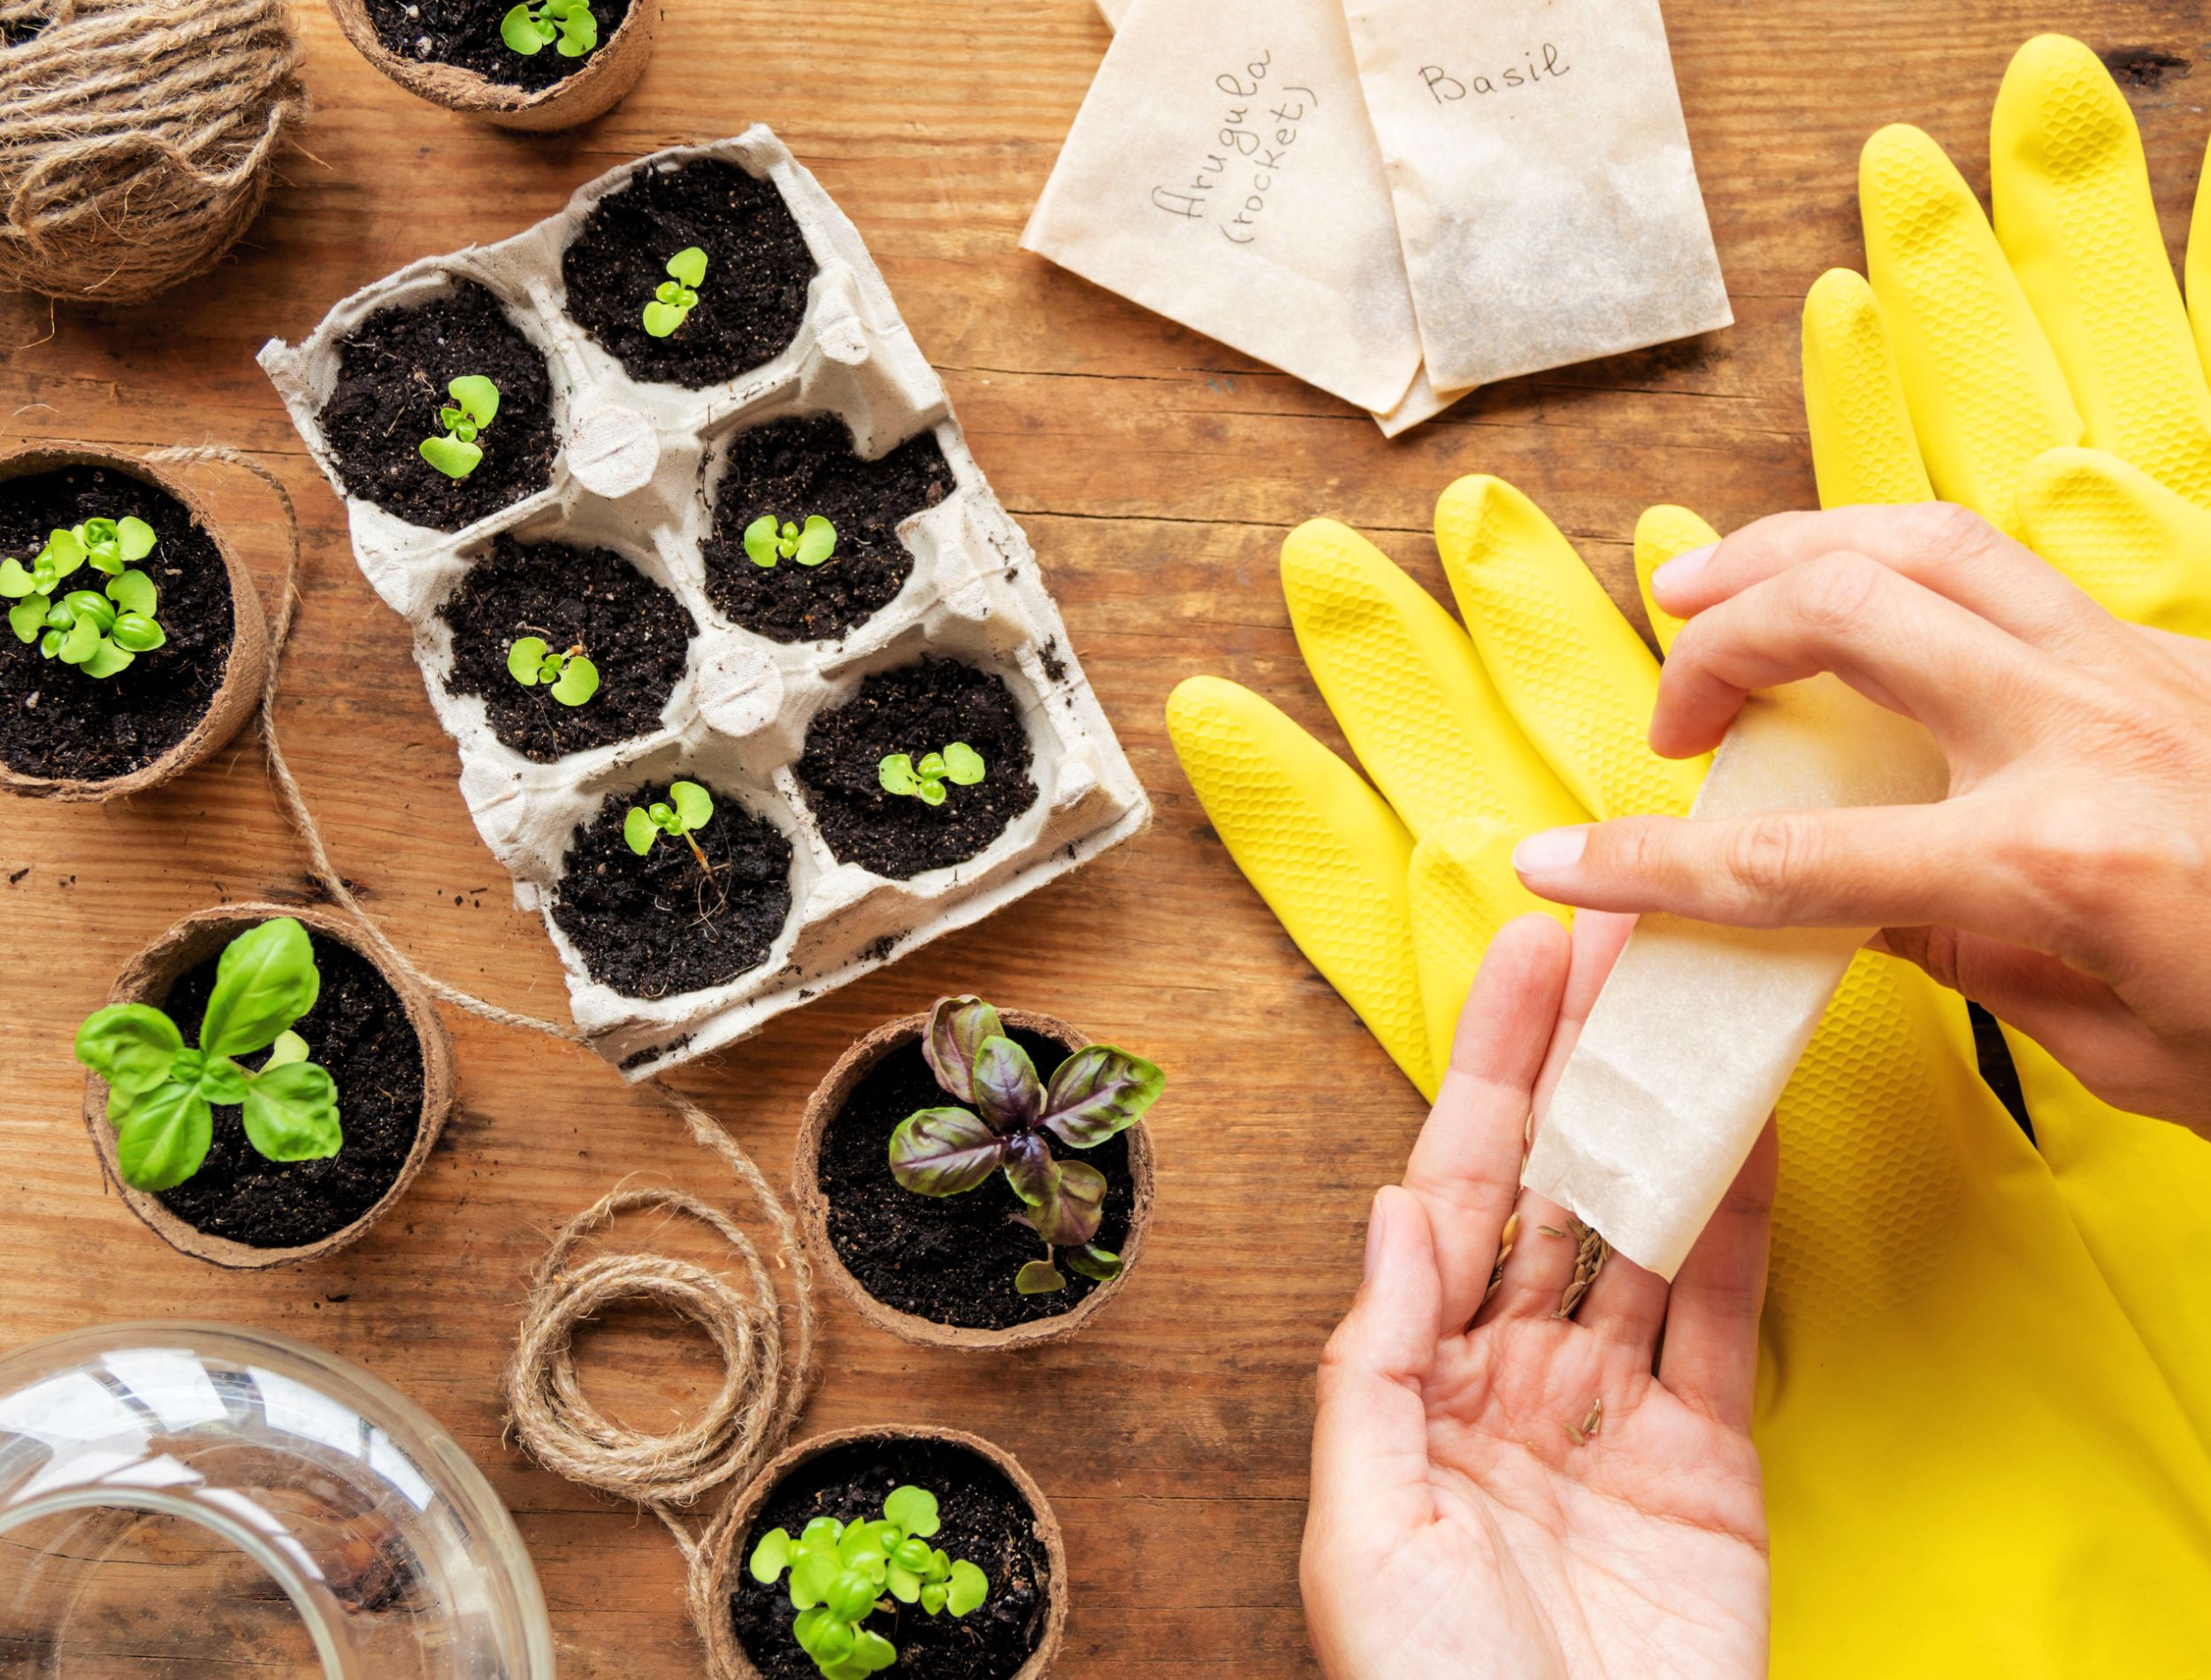 Basil seedlings in biodegradable pots on wooden table. Top view on woman hands with seeds in paper bags. Green plants in peat pots and yellow rubber gloves.